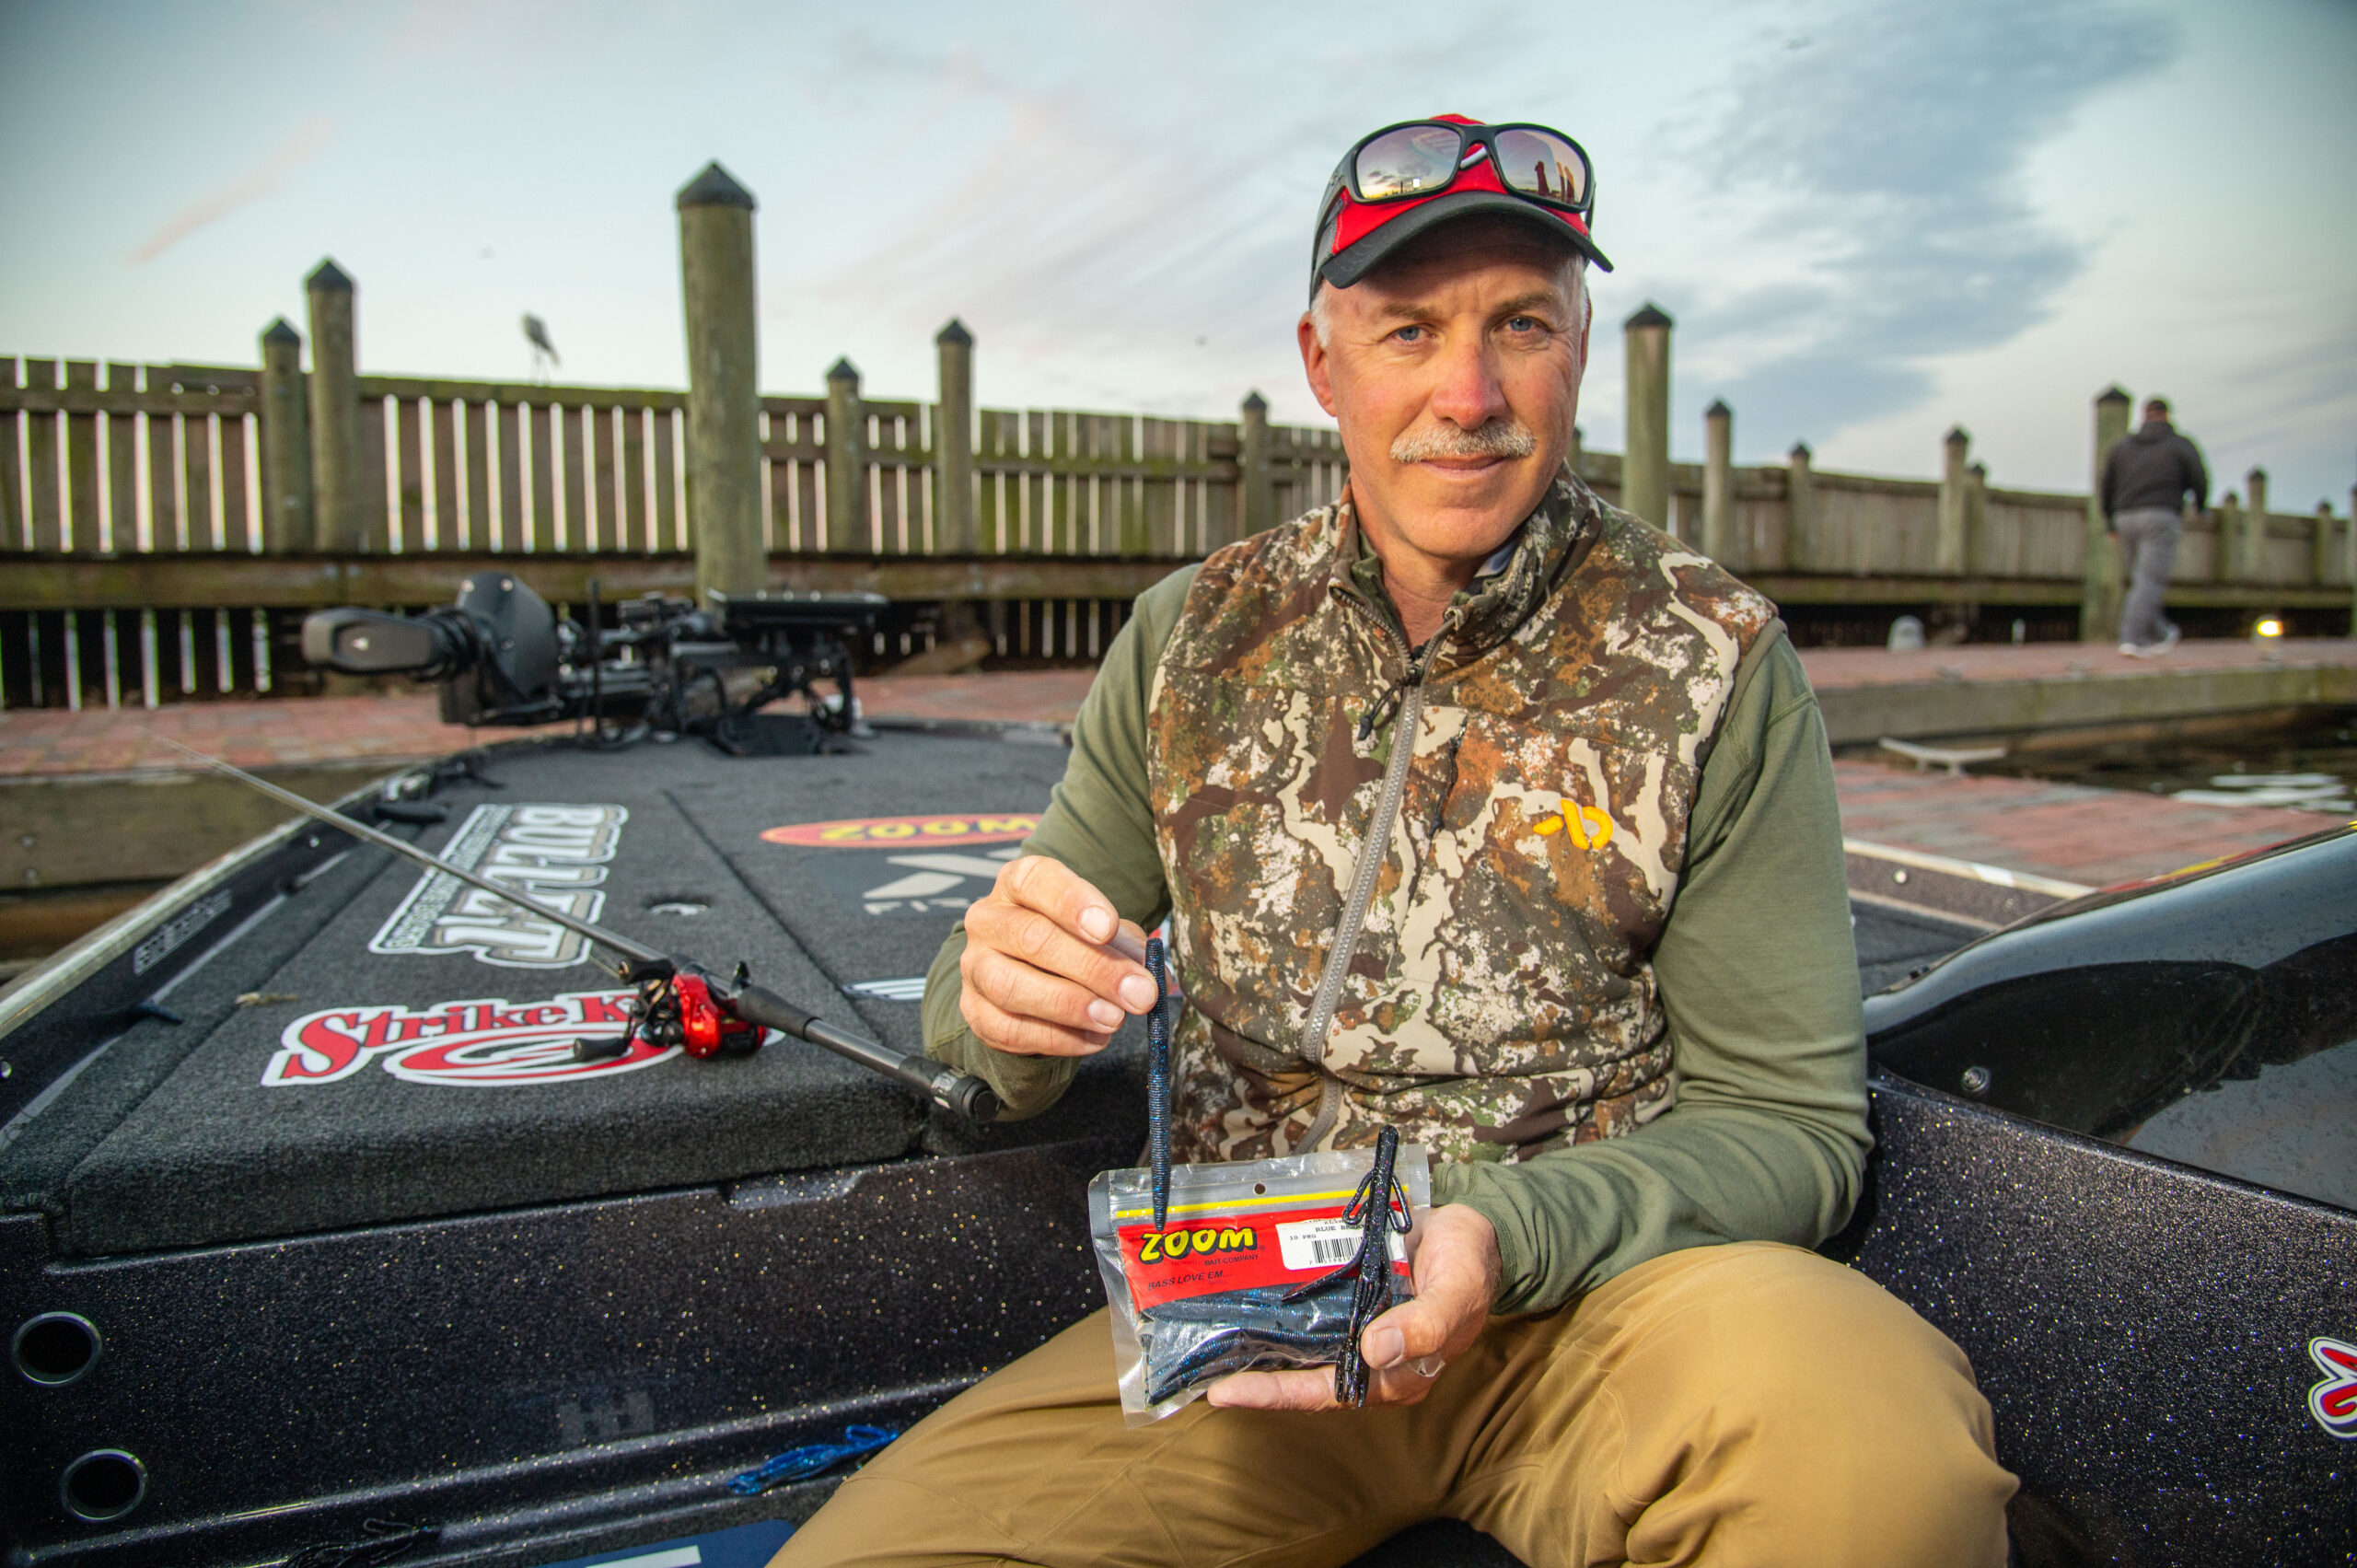 TOP 10 BAITS & PATTERNS: How they caught 'em on the Kissimmee